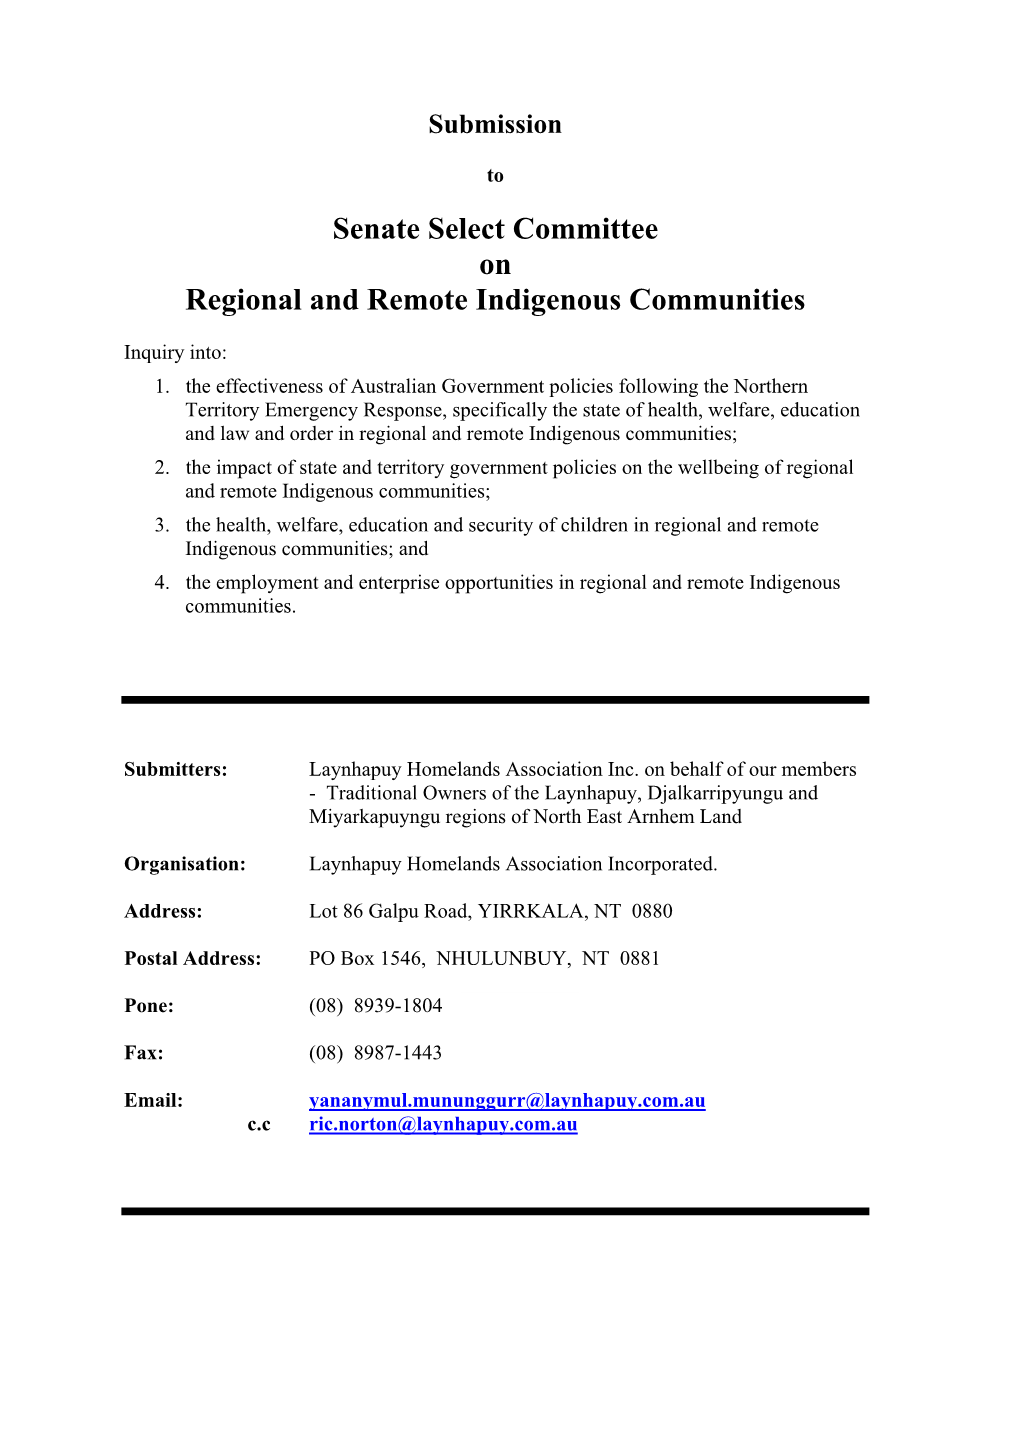 Senate Select Committee on Regional and Remote Indigenous Communities